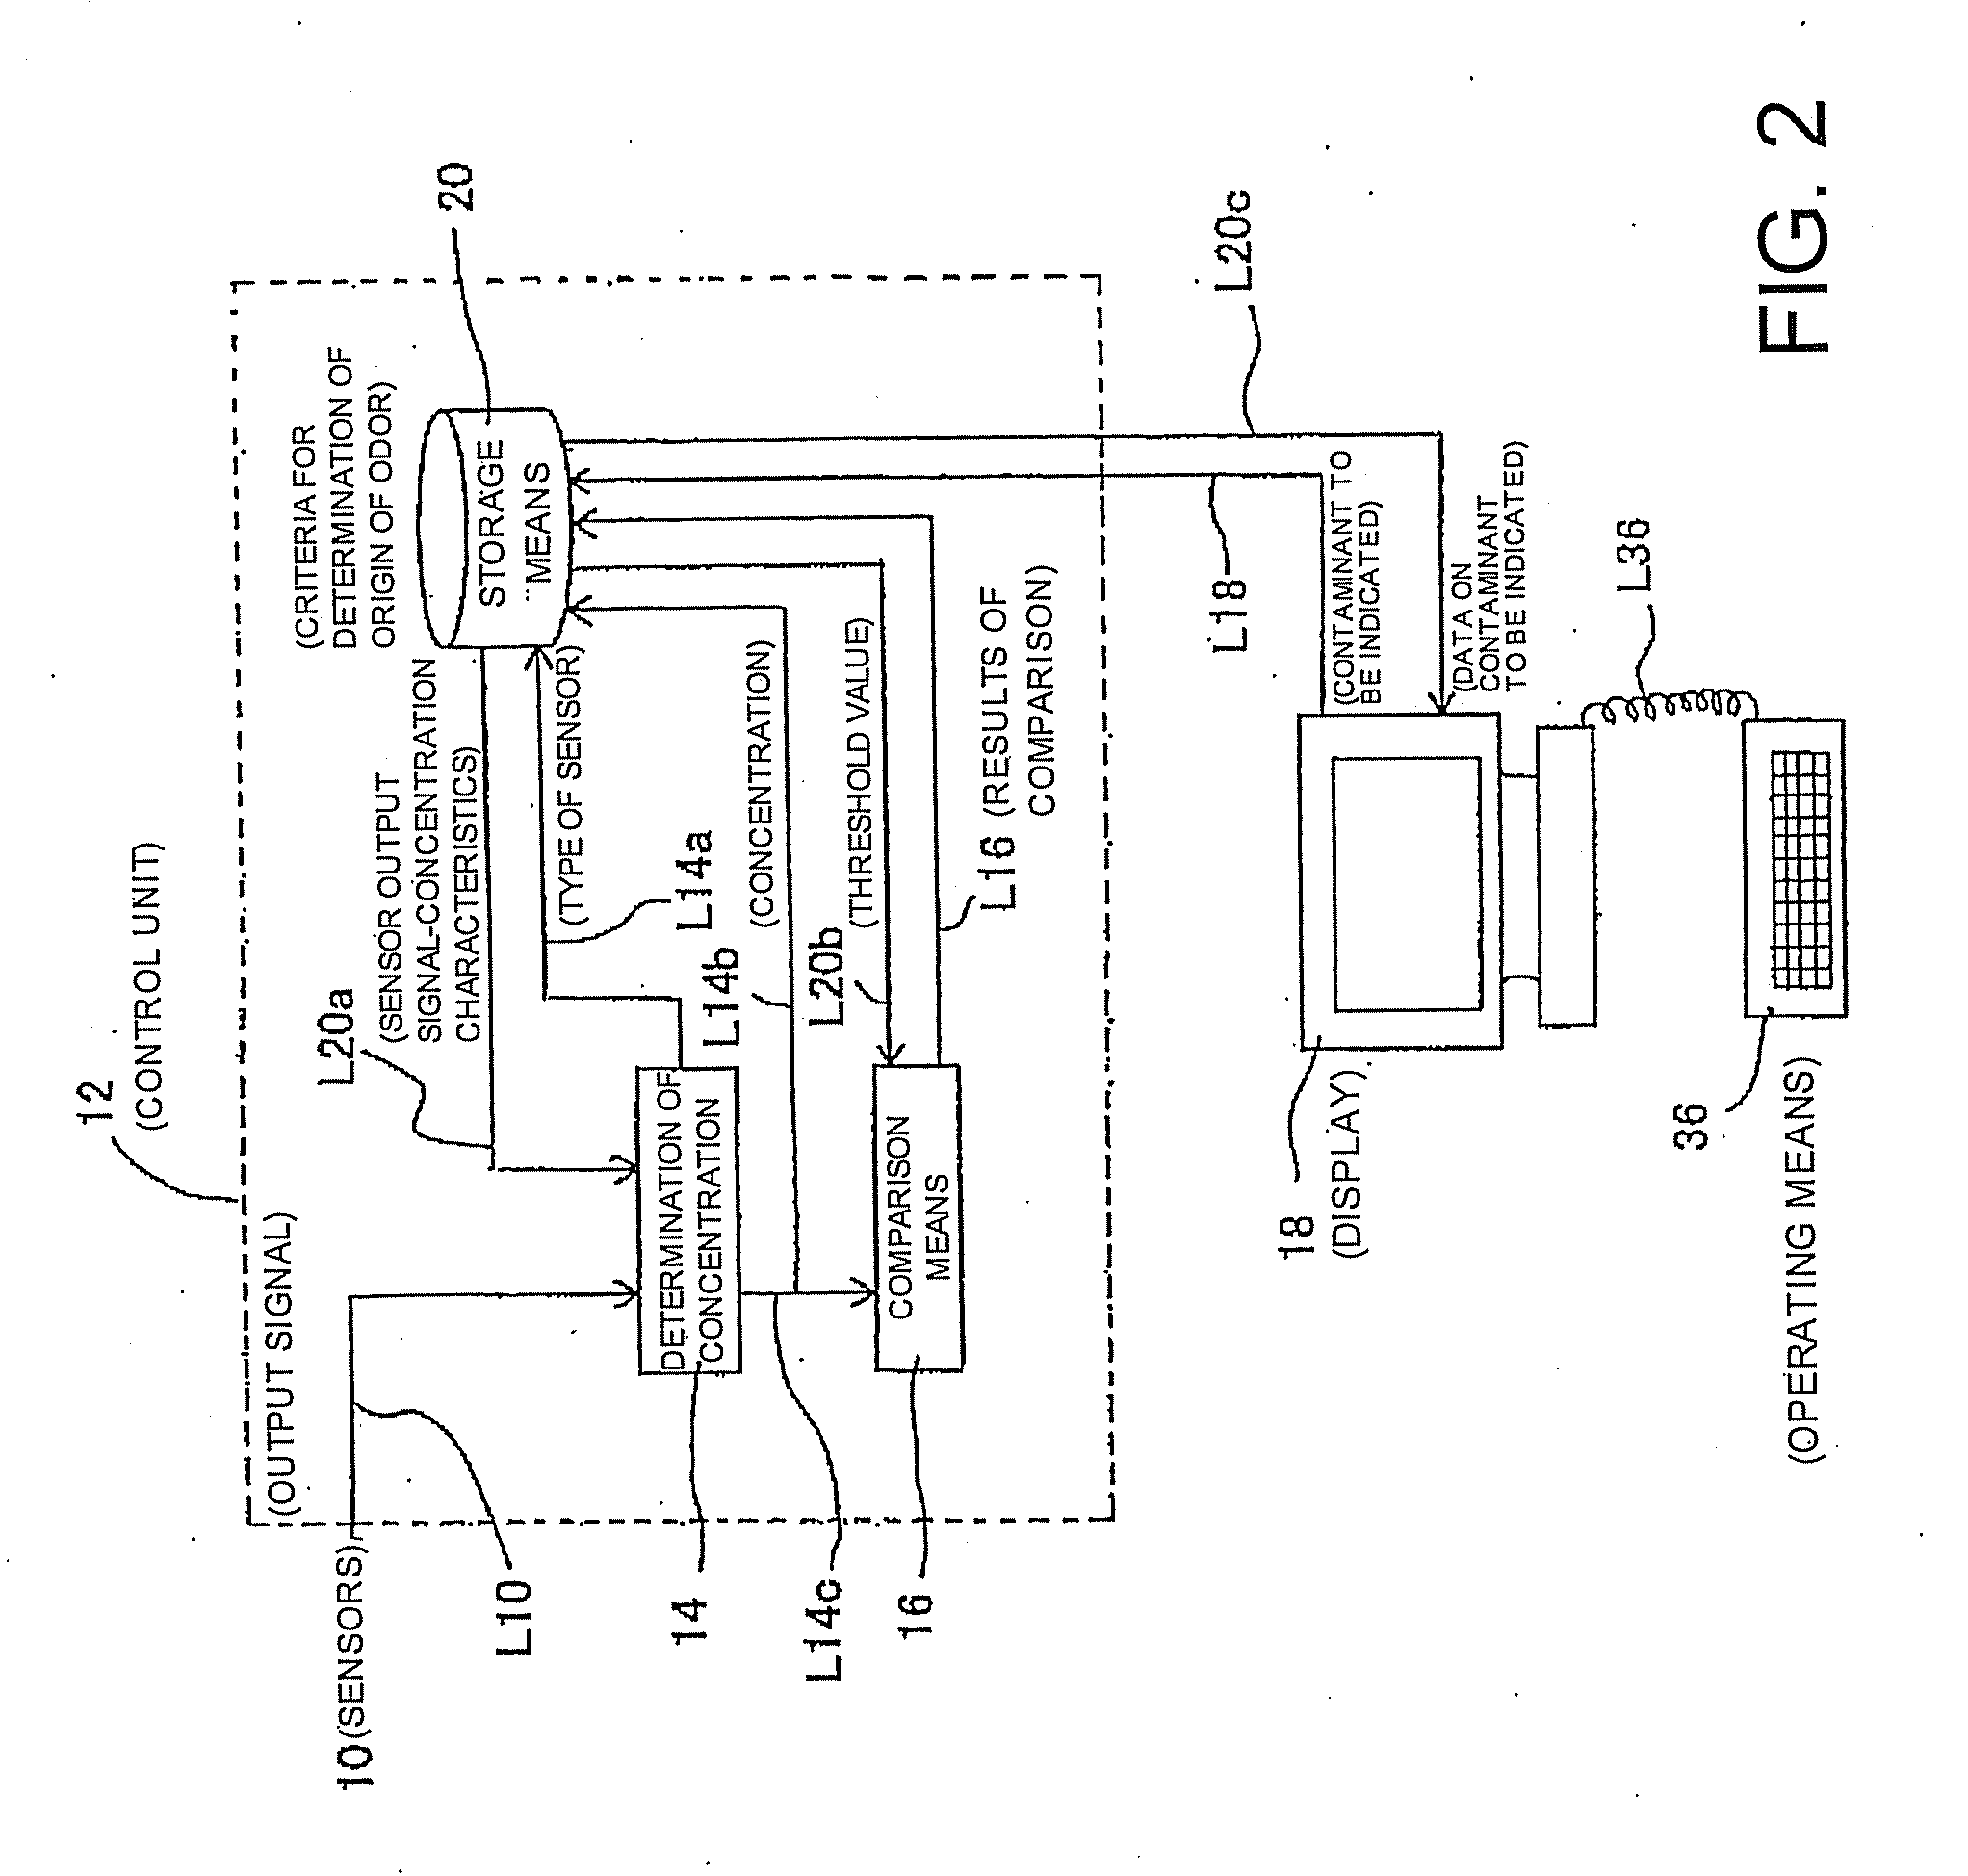 Soil contamination detector and detection method